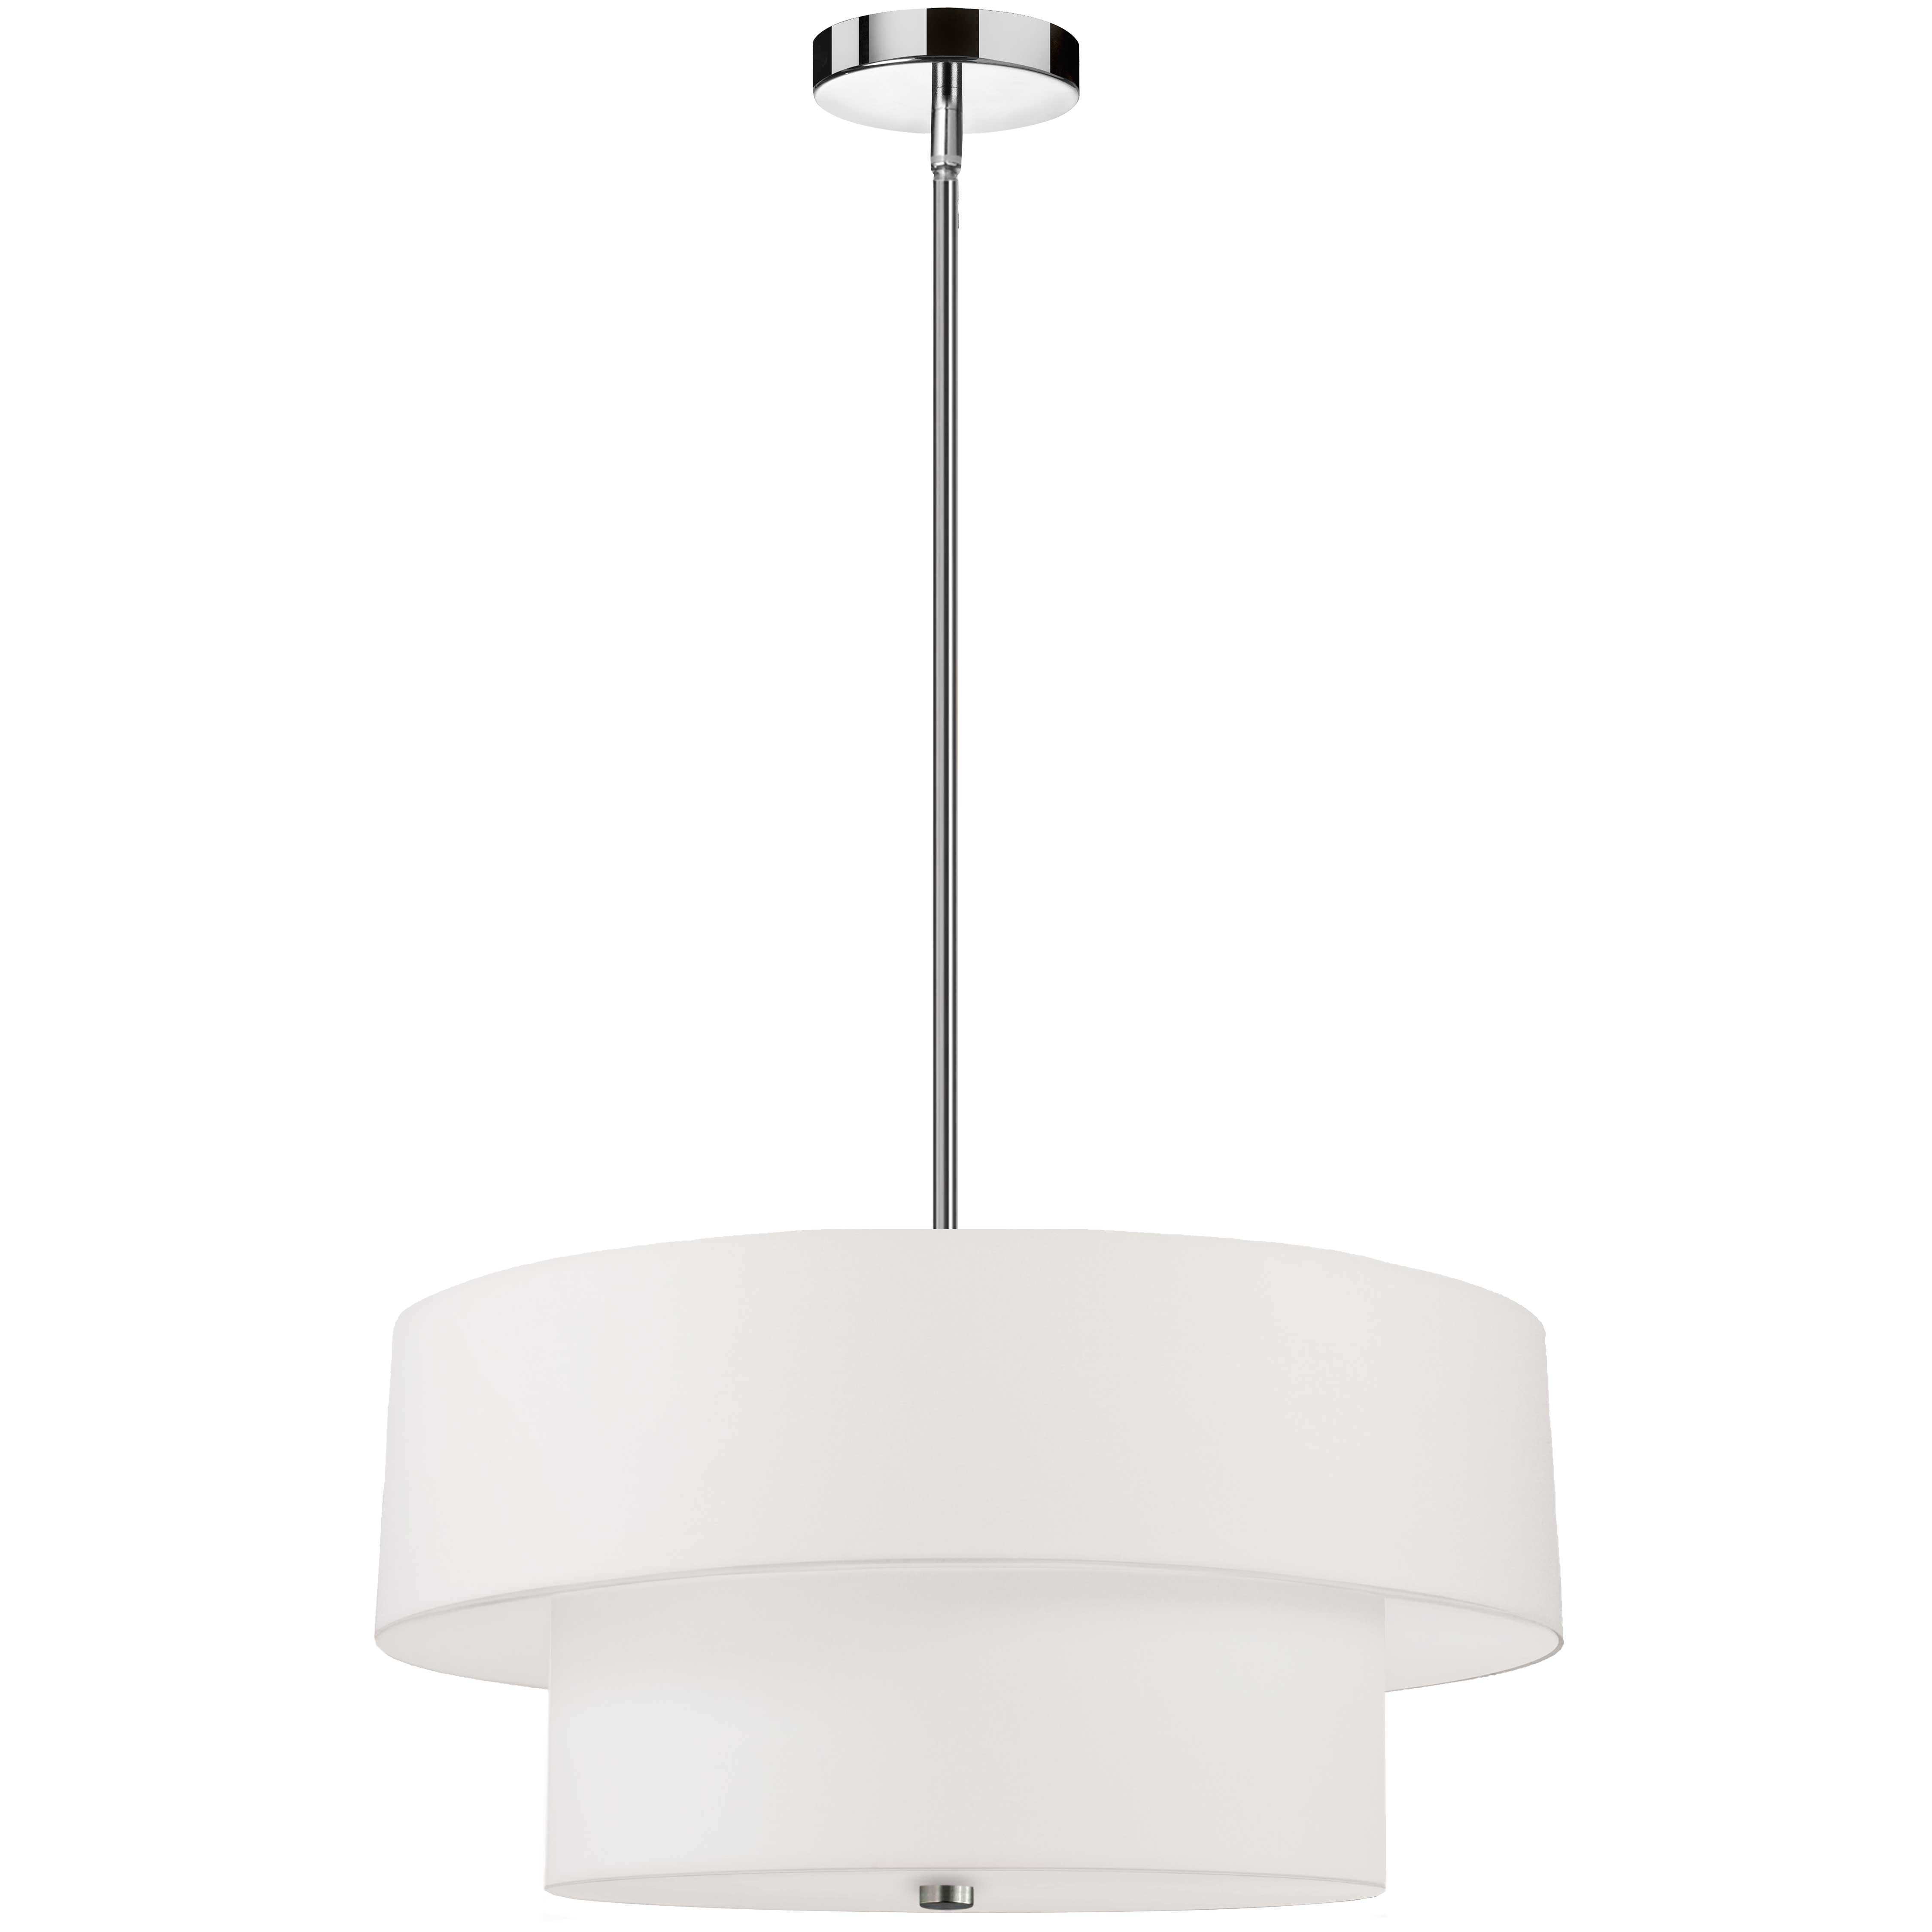 Mid-century, modern or contemporary, the Everly family of lighting will add a fashionable presence to your home décor. The pendant design comes in a one or two tier construction. The metal frame drops to a relatively narrow drum shade, with a contrasting inner shade. From the metal frame to inner and outer shades, color options range from monochromatic to dramatic contrast. With its elegant proportions, the Everly family of lighting brings an element of luxury to foyers, living rooms or kitchens.